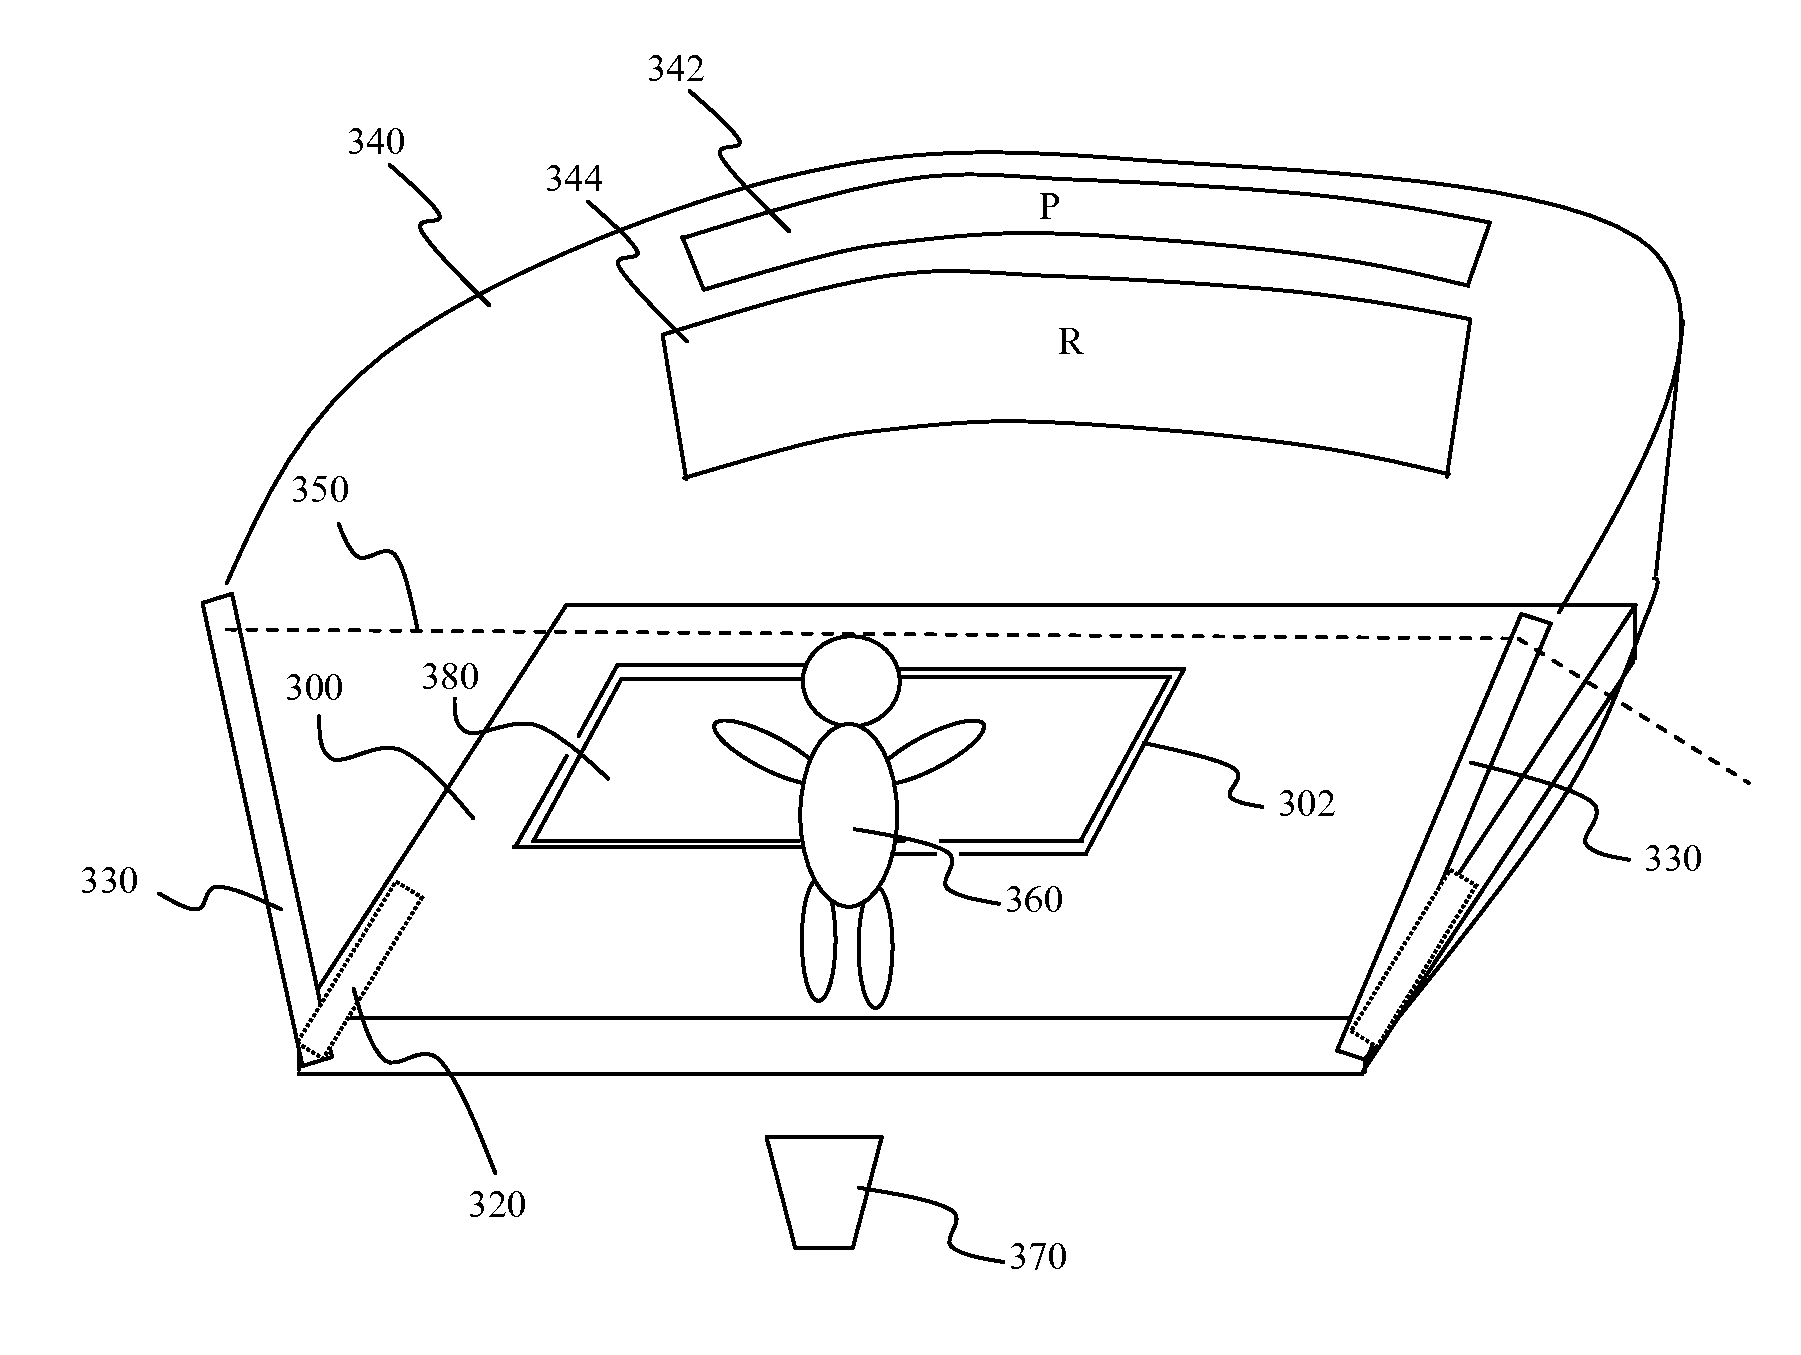 Method and Apparatus for Manipulation of a Toy Marionette